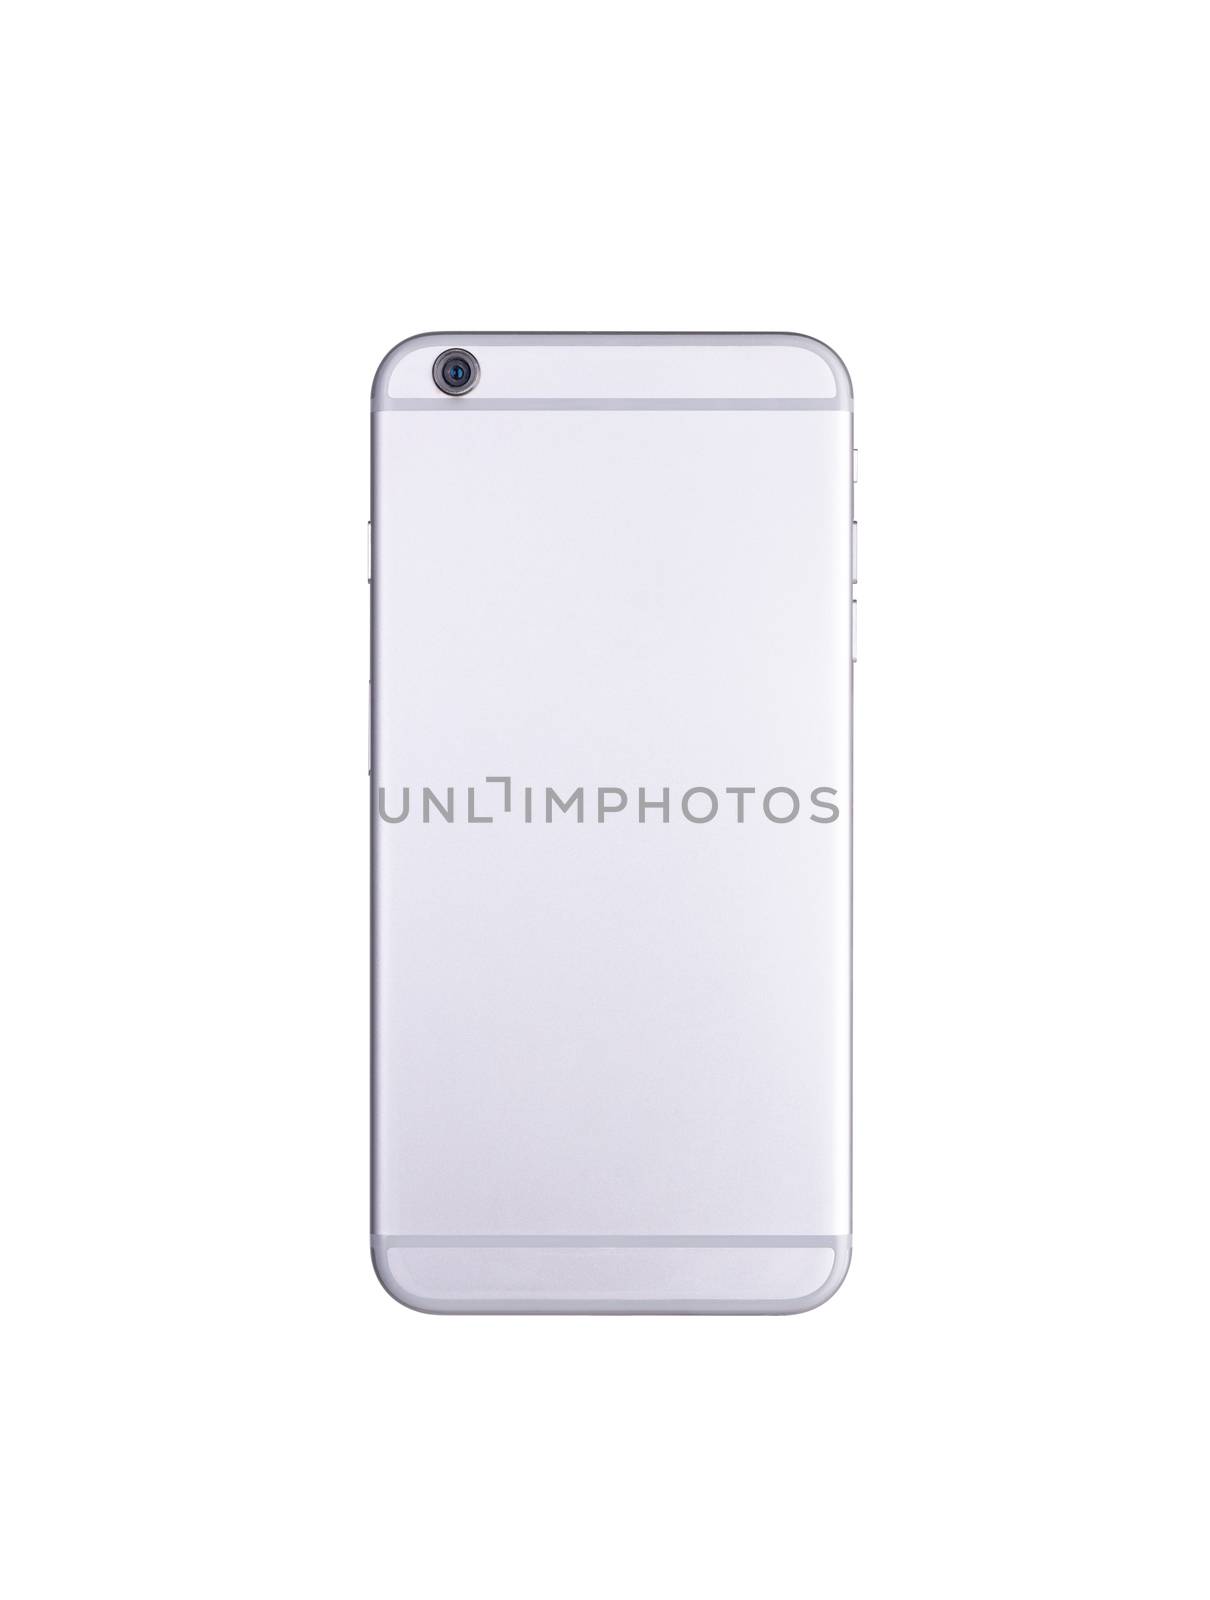 Backside view modern smartphone mockup. Back mobile smart phone technology studio shot isolated on over white background with clipping mask path on the phone